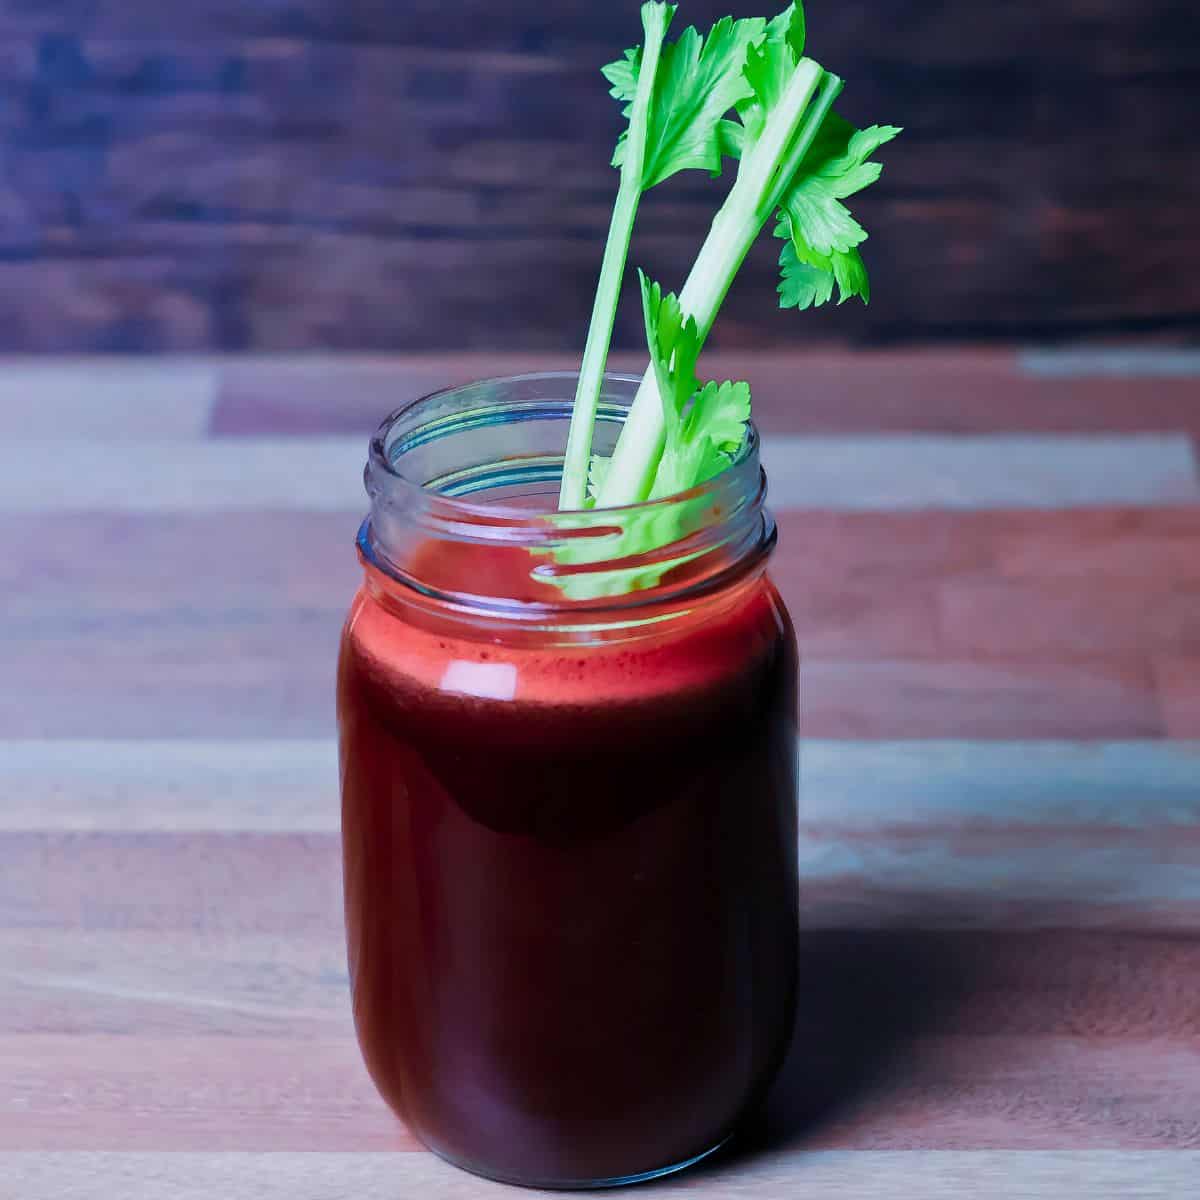 A mason jar filled with a freshly made juice, predominantly beet in color, with a celery garnish